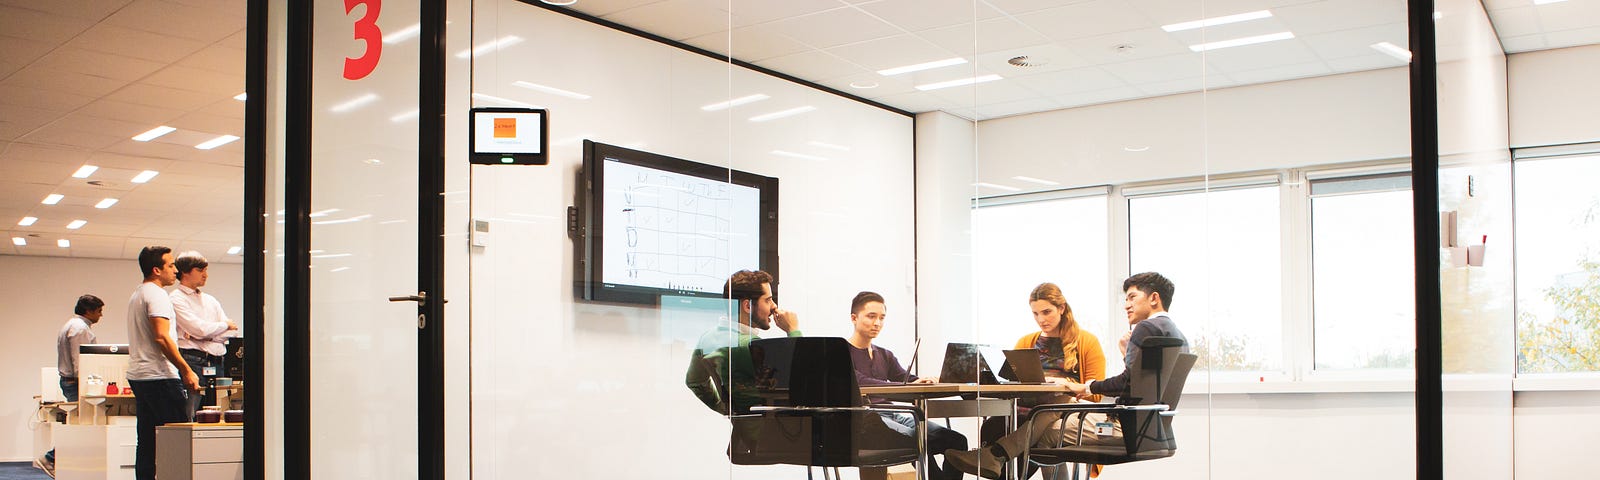 Four people in discussion while sitting at a meeting table in a glass-walled meeting room.